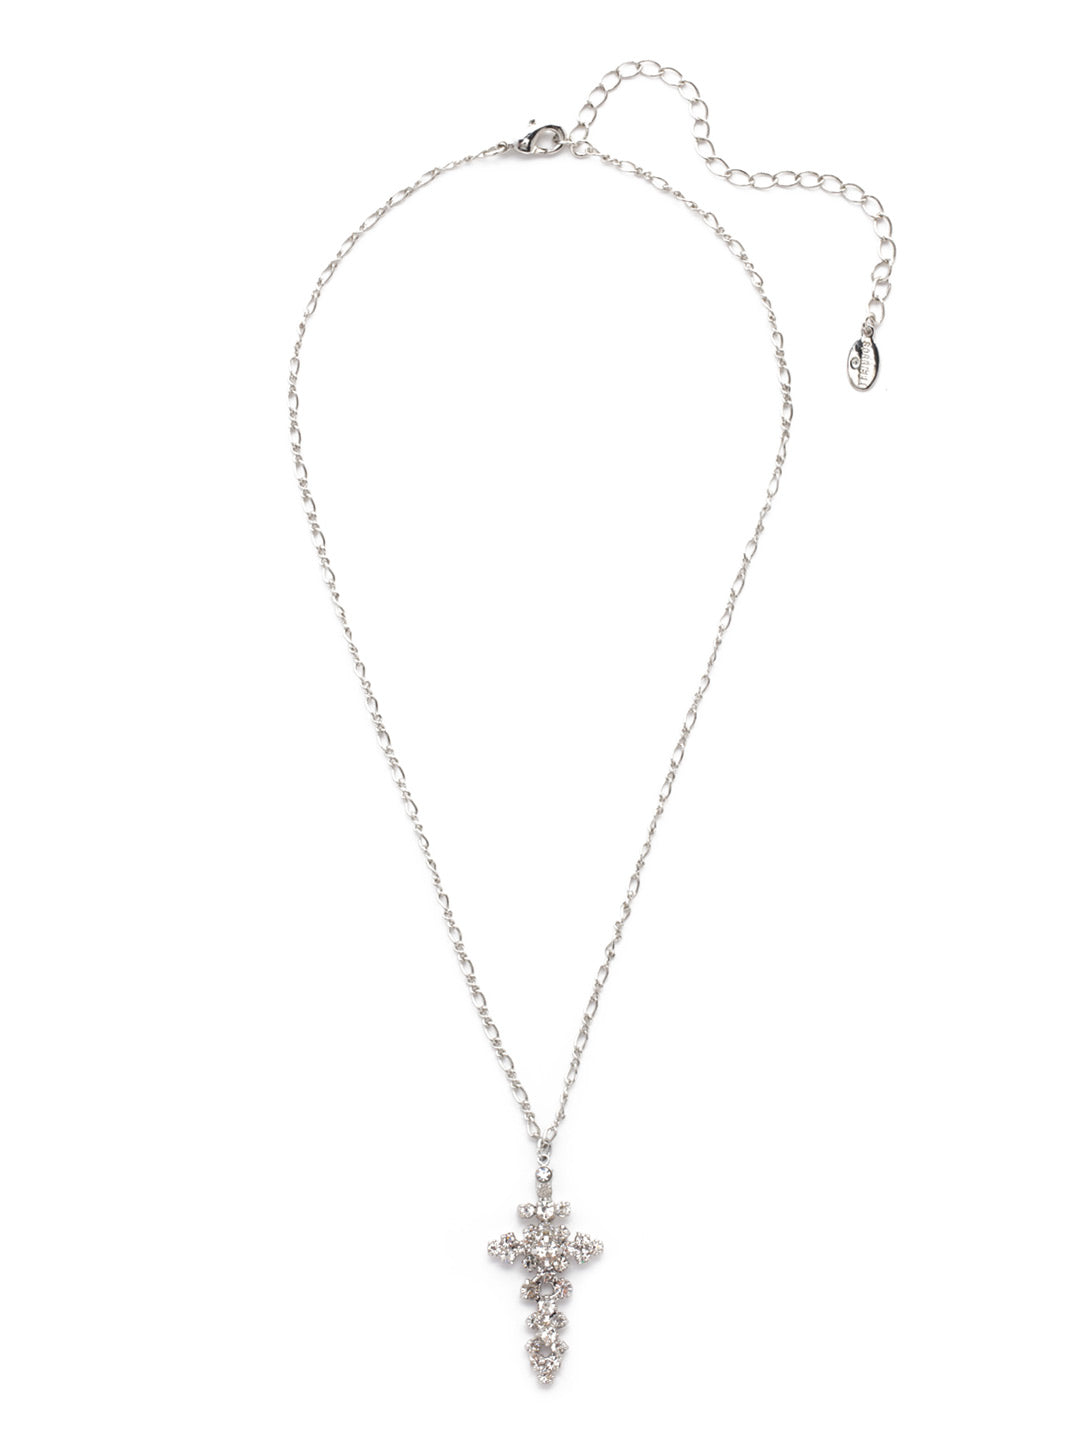 Kennedy Cross Pendant Necklace - NEX9PDCRY - <p>Decorated with a variety of crystals and hanging from an adjustable chain, the Kennedy Cross Pendant takes a classic cross and elevates it into an updated wardrobe staple From Sorrelli's Crystal collection in our Palladium finish.</p>